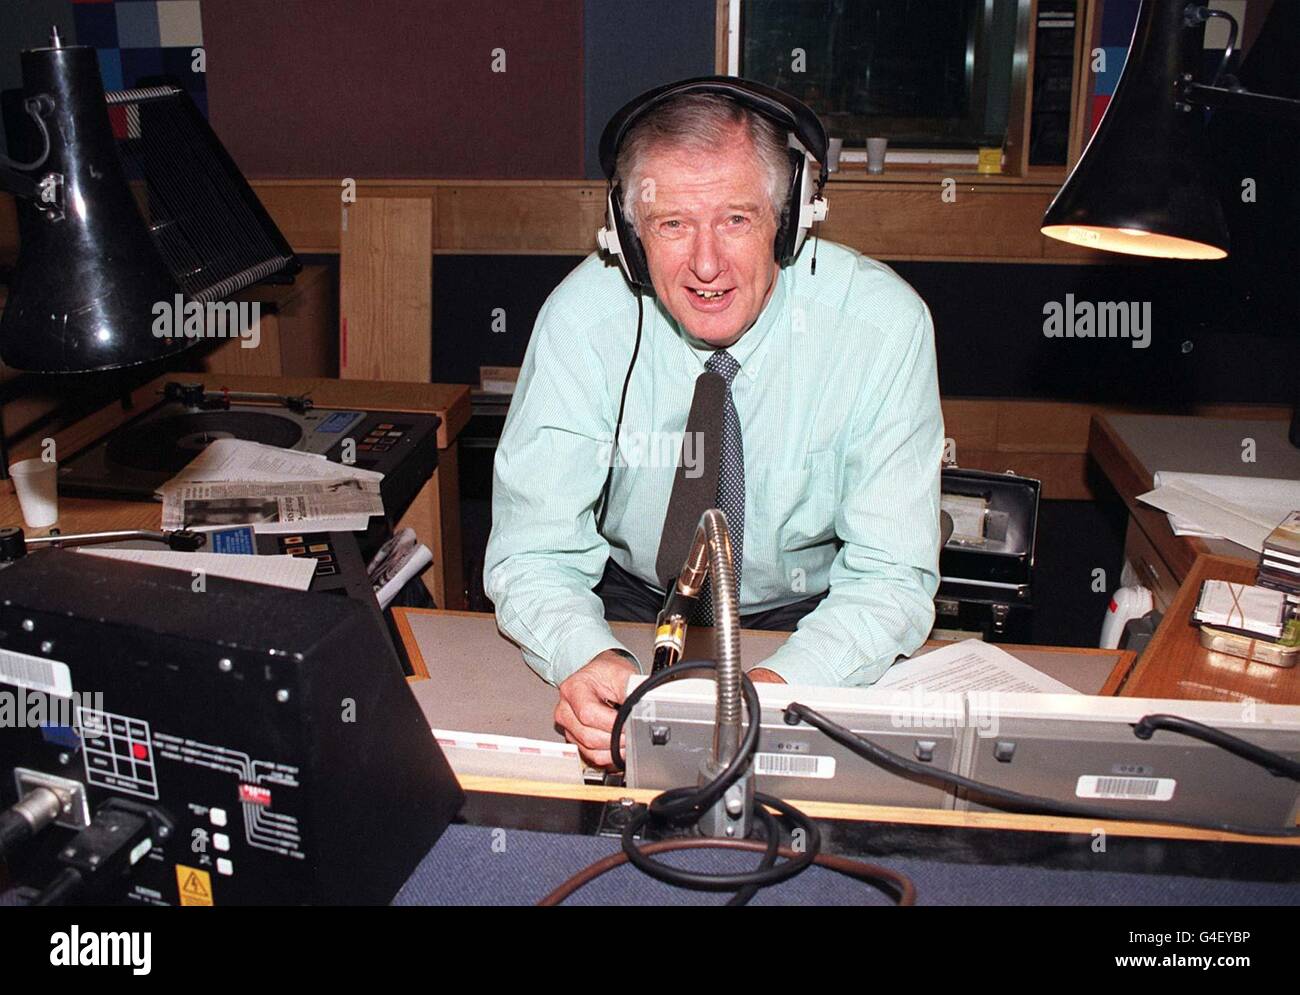 John Dunn, Sony-award winning BBC Radio 2 presenter, who is to step down from his early evening show from today (Friday). Mr Dunn, 64, who has been presenting a daily show for the station for over thirty years, is to concentrate on freelance broadcasting. *27/11/04: John Dunn who died aged 70. Mr Dunn was one of the best known voices on Radio 2, having been broadcasting on the station for more than 30 years. He had been suffering from cancer for some time. Stock Photo